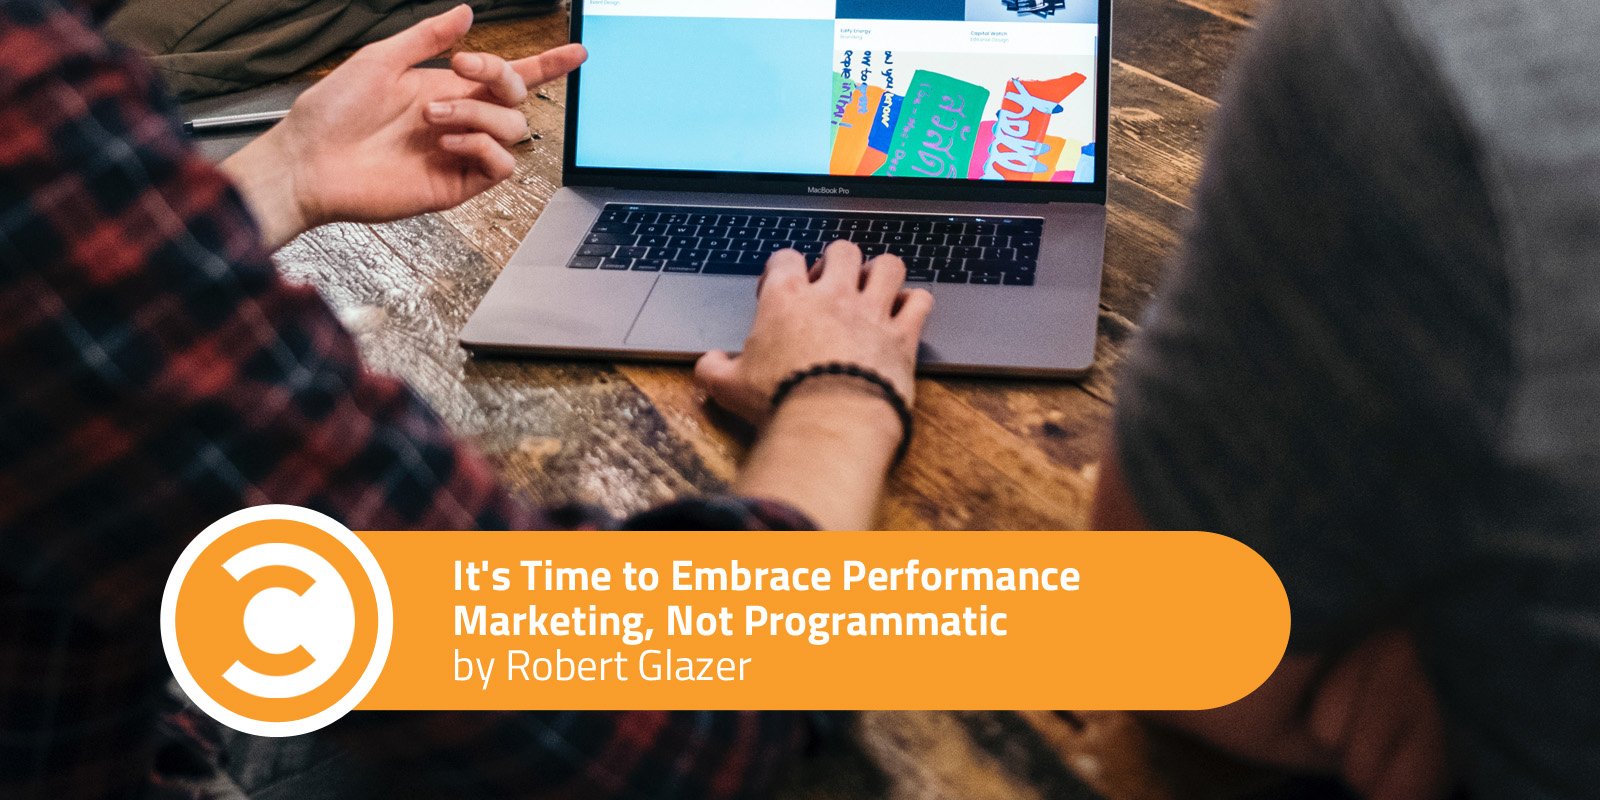 It's Time to Embrace Performance Marketing, Not Programmatic